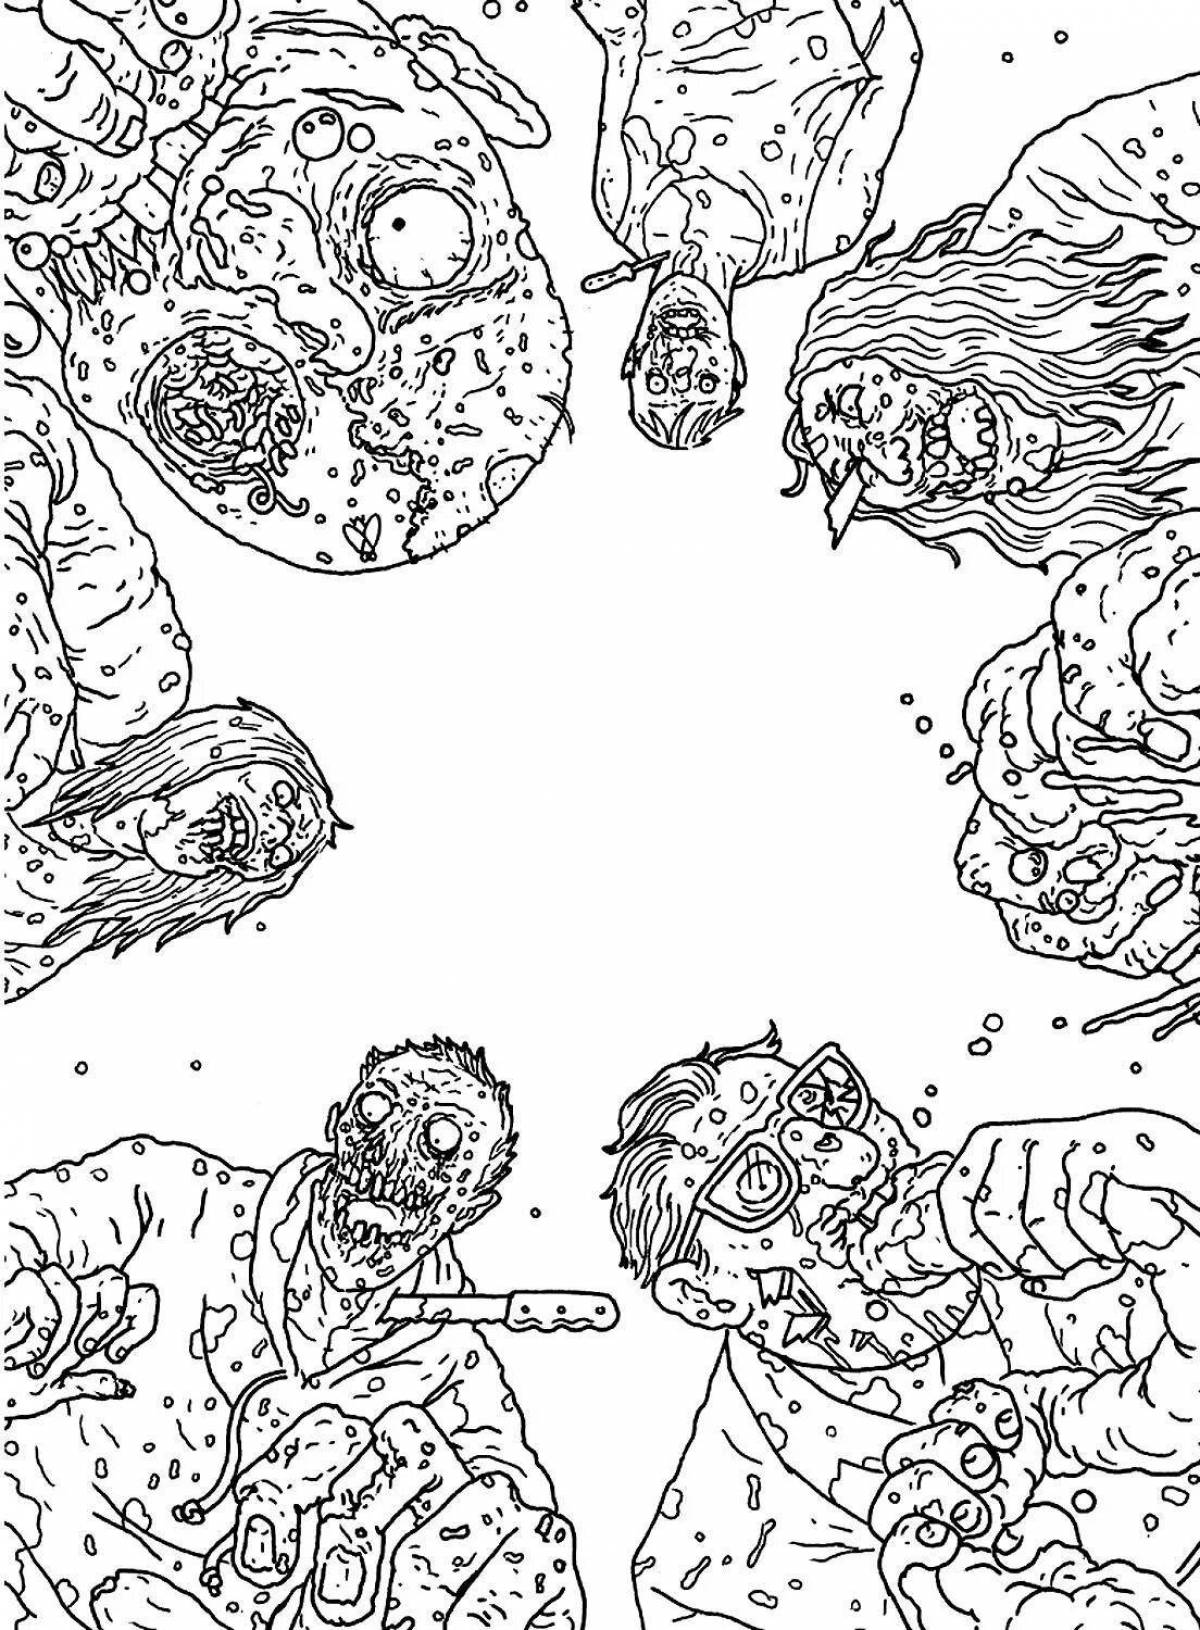 Photo Ghoulish zombie apocalypse coloring book